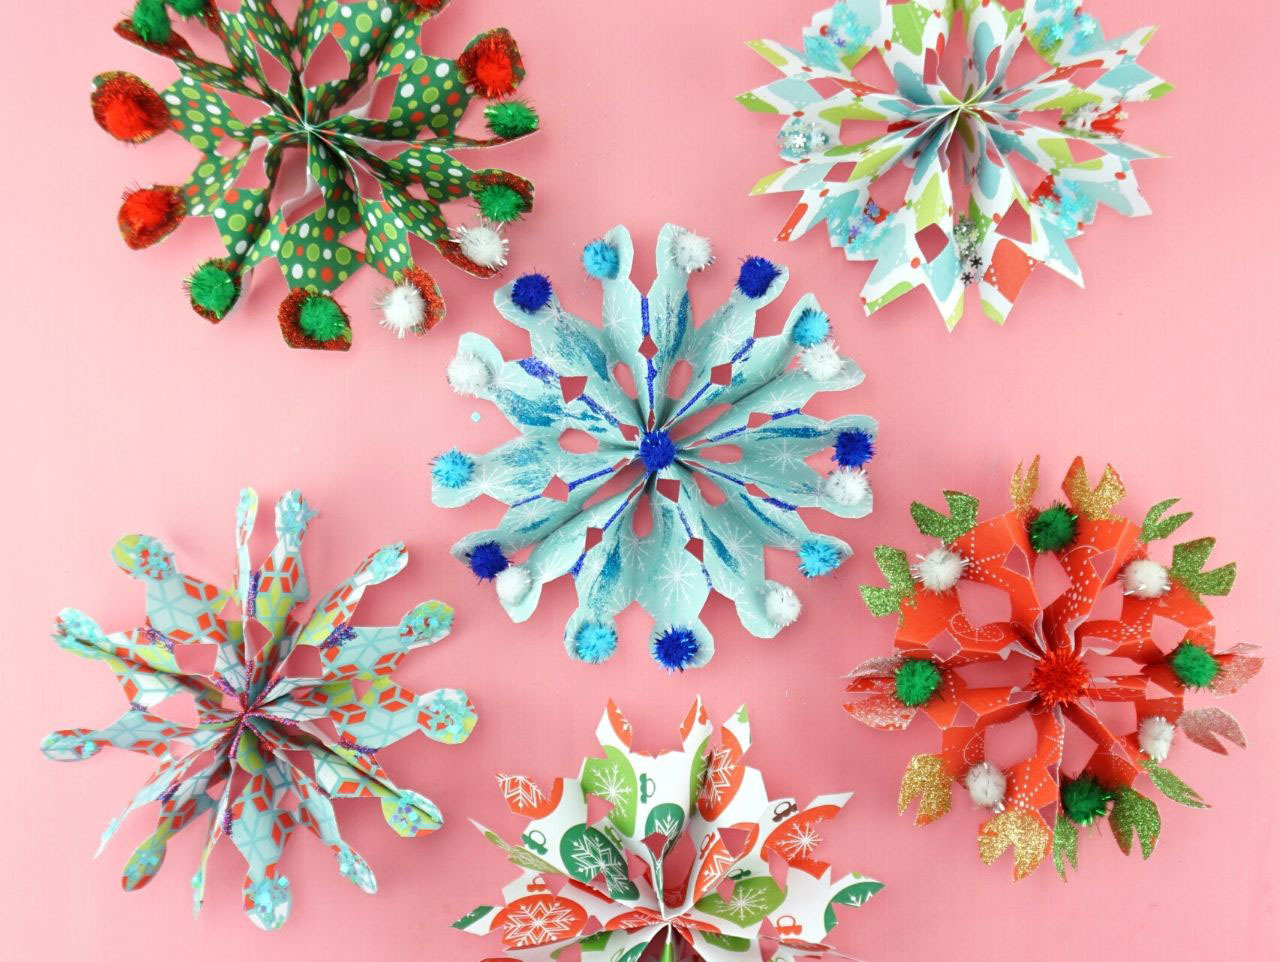 How to Make 3D Snowflakes